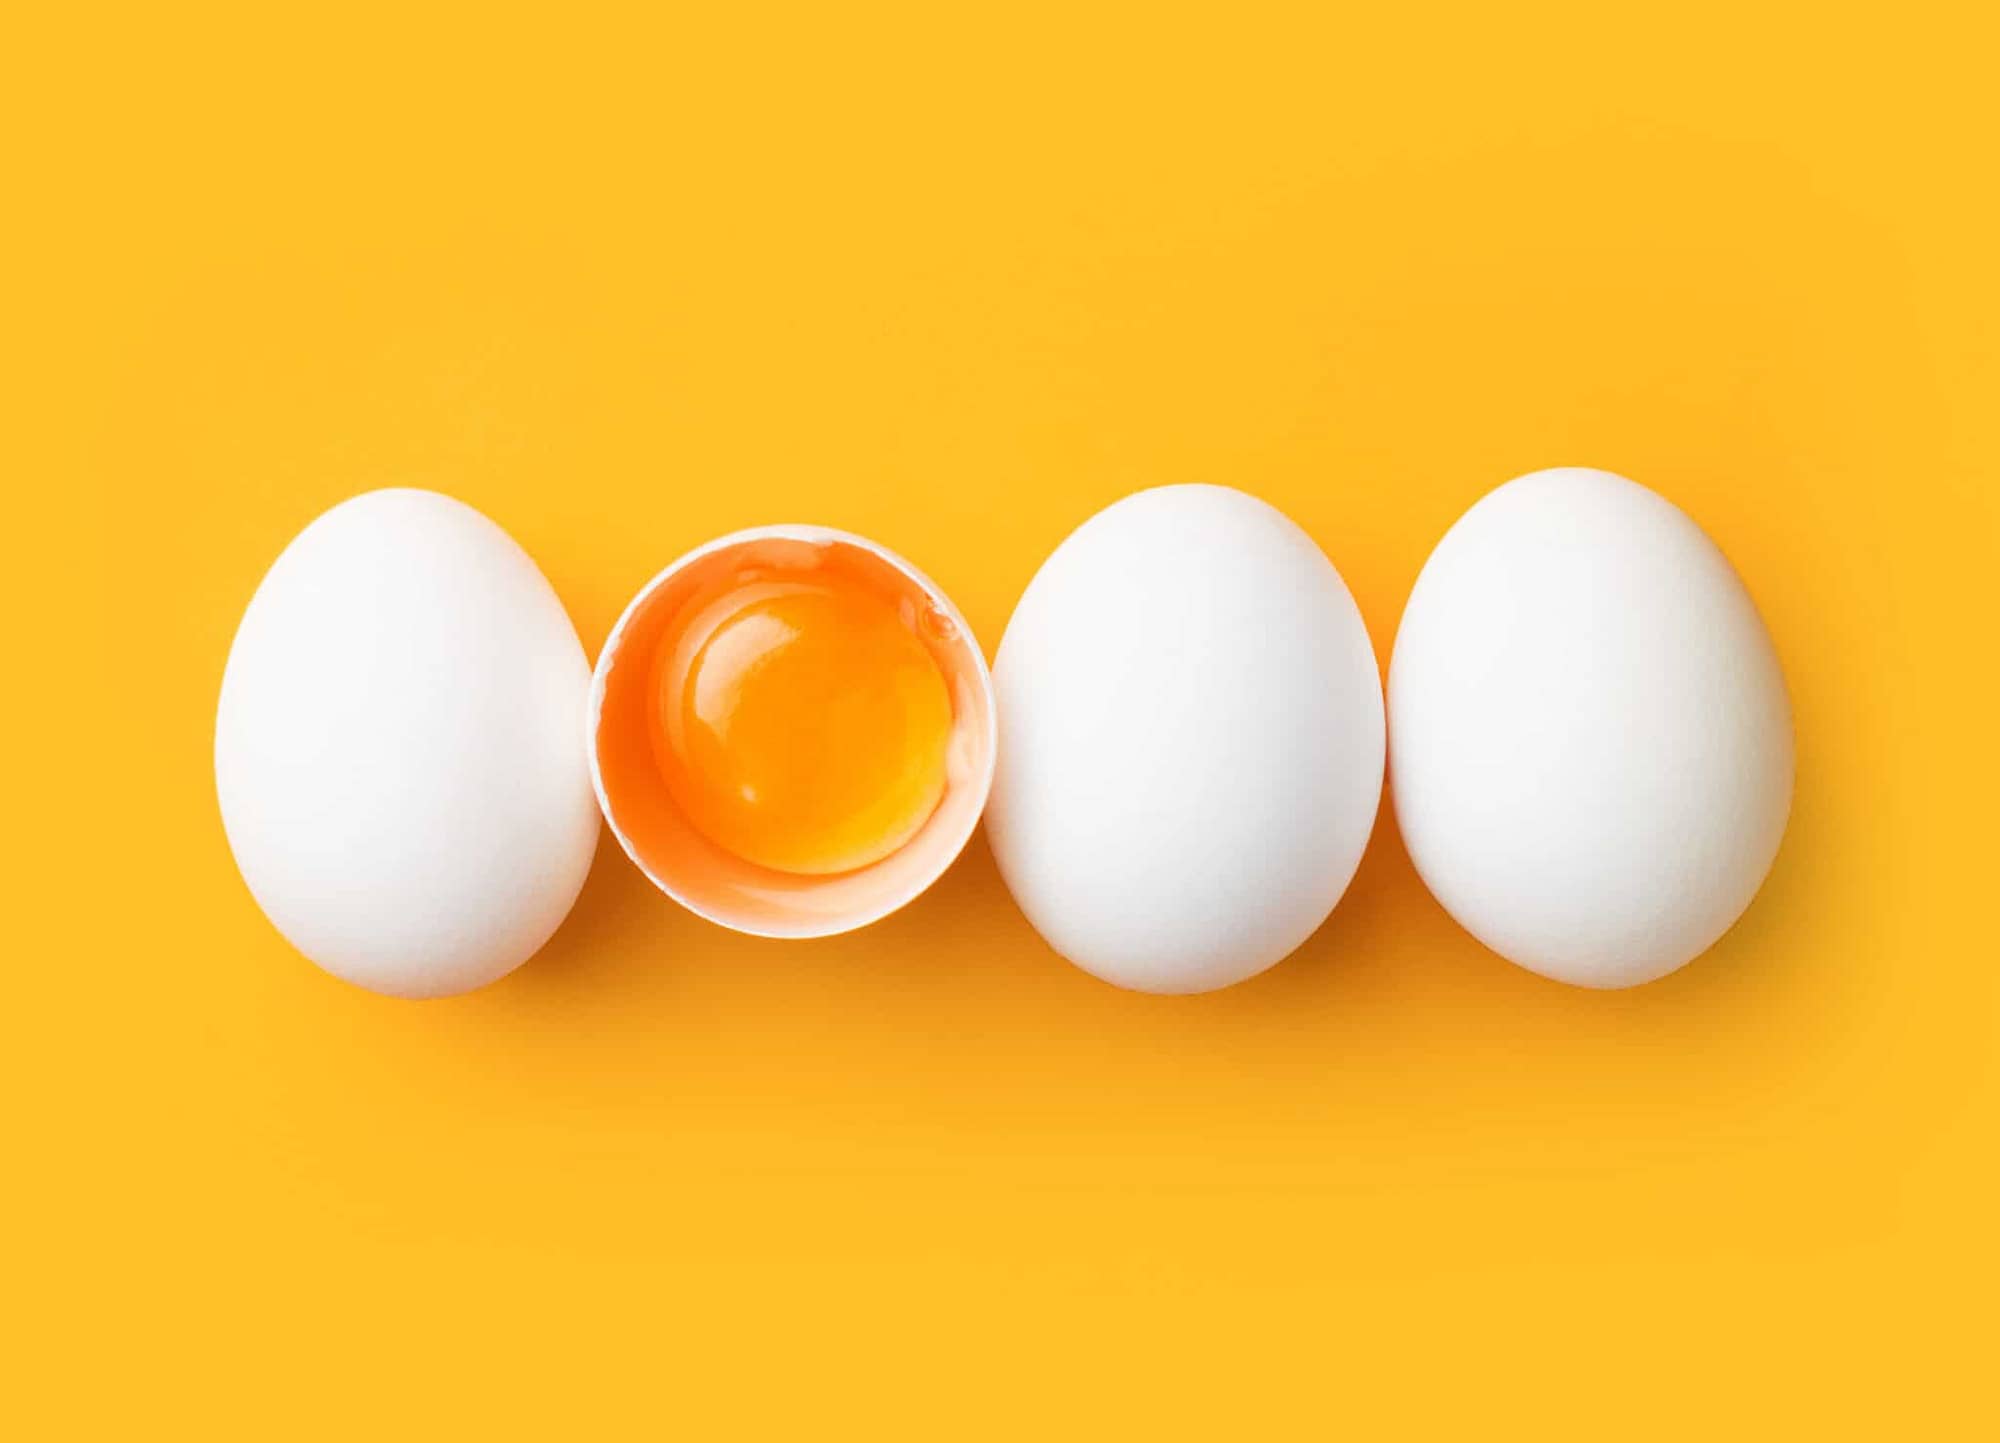 Egg yolk in egg shell with 3 other eggs